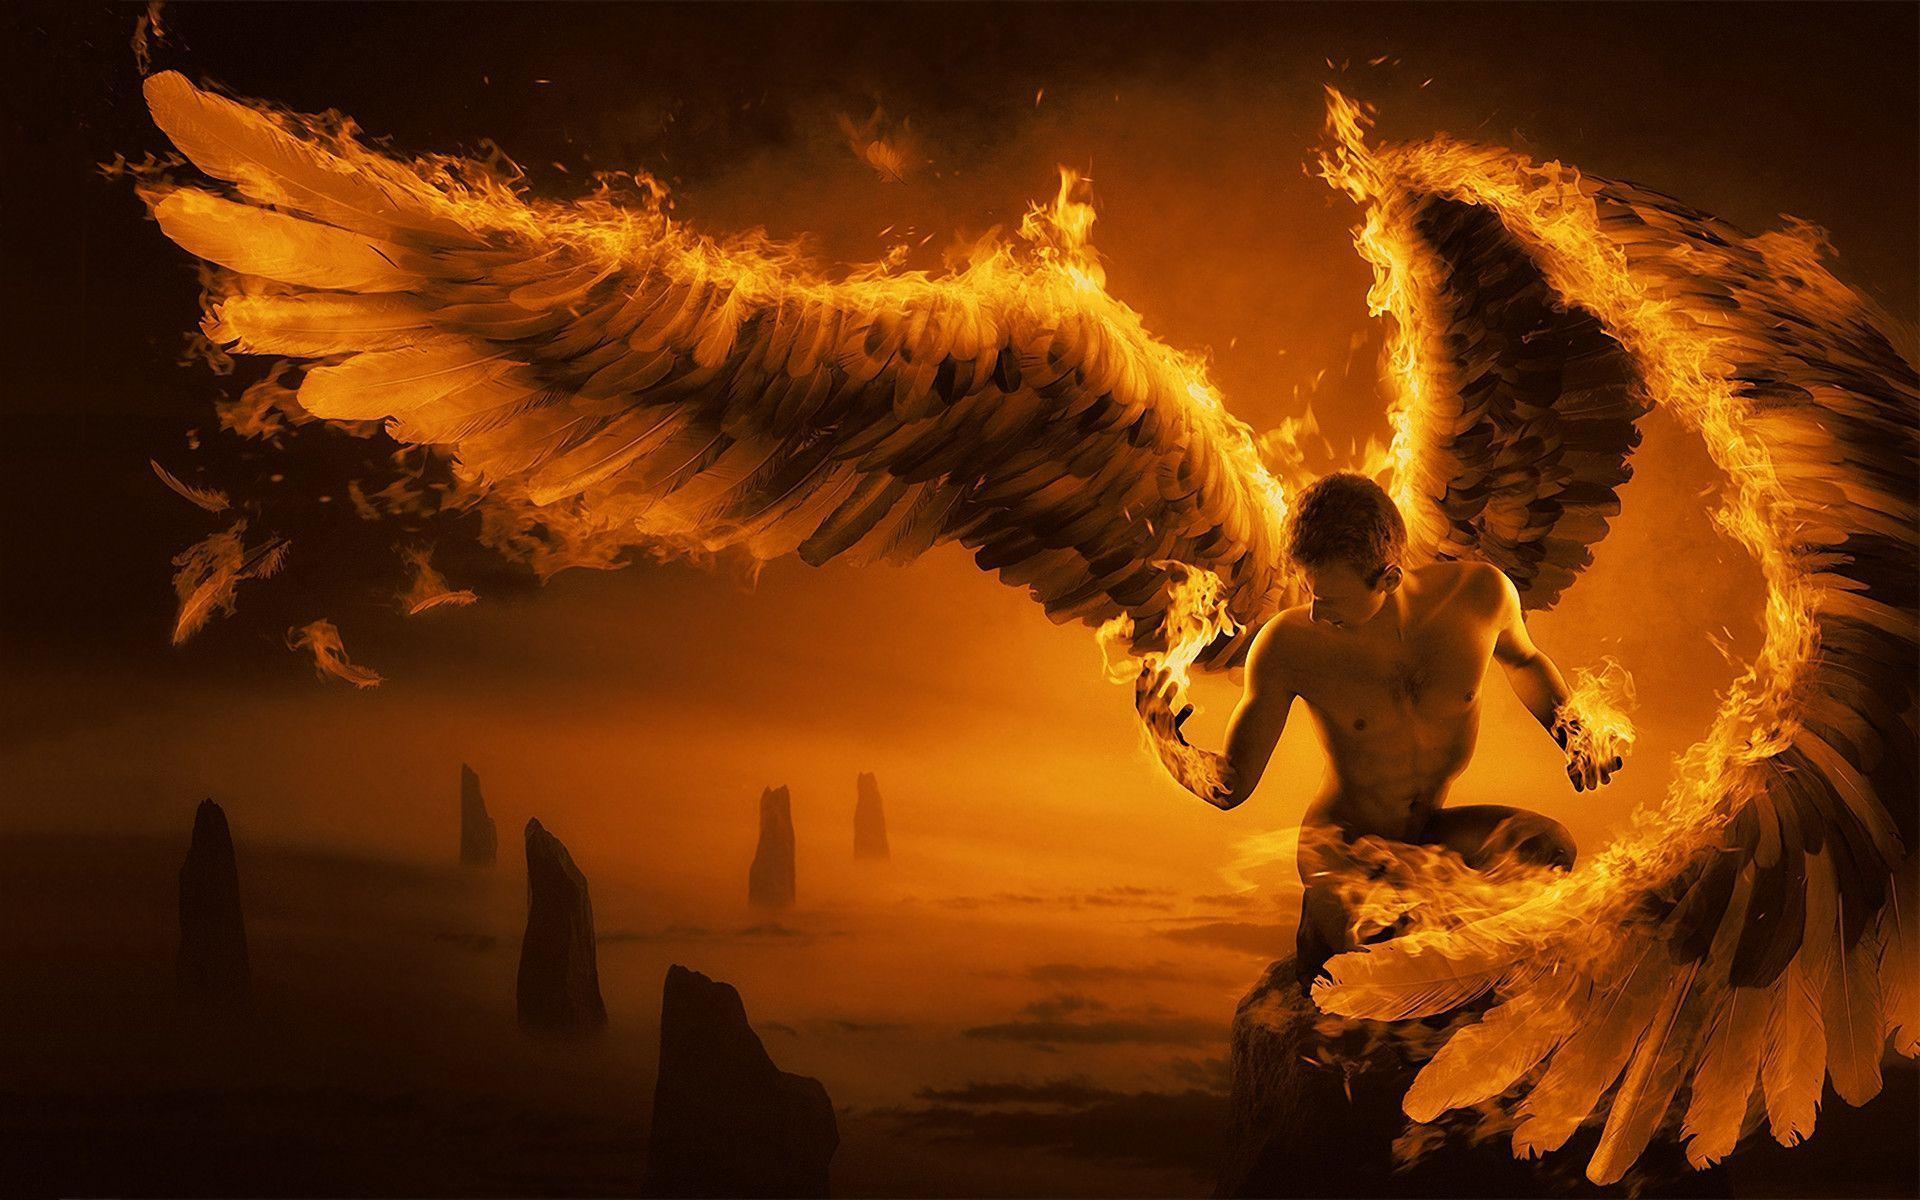 Download Fire Angel Man For Desktop Wallpapers Free By Warnerboutique